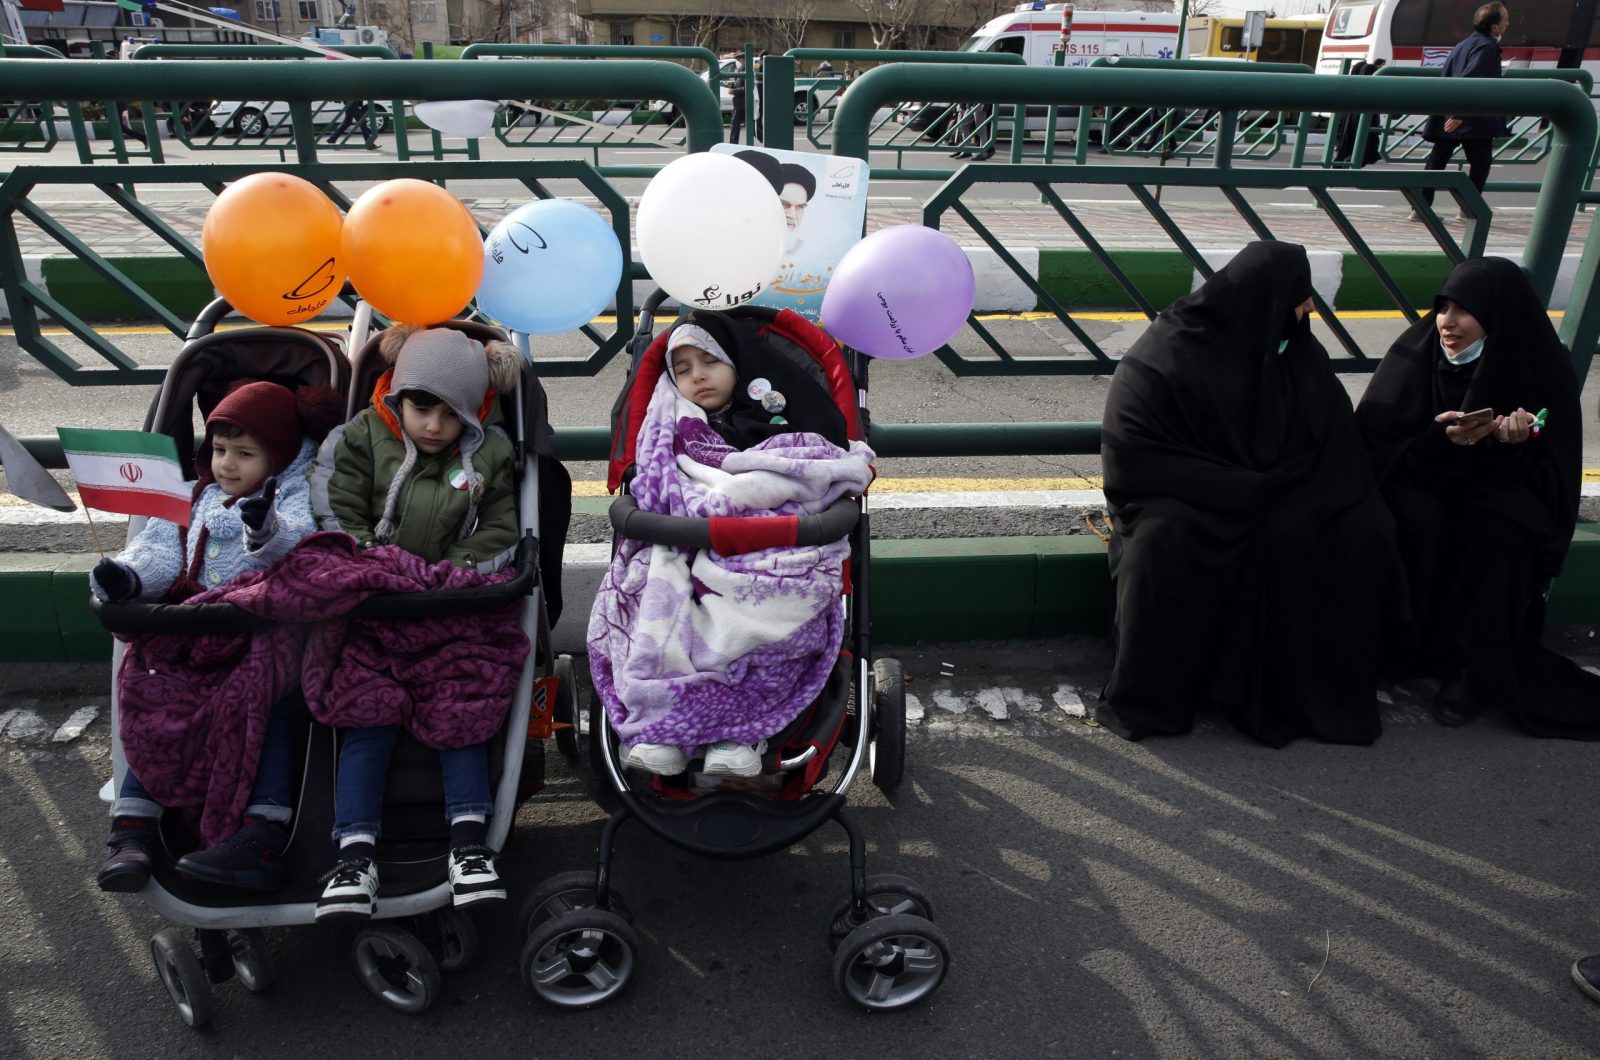 epa10460371 Iranian women sit next to their child during the 44th anniversary of the 1979 Islamic Revolution, at the Azadi (Freedom) square in Tehran, Iran, 11 February 2023. The event marks the 44th anniversary of the Islamic revolution, which came ten days after Ayatollah Ruhollah Khomeini's returned from his exile in Paris to Iran, toppling the monarchy system and forming the Islamic Republic  EPA/ABEDIN TAHERKENAREH